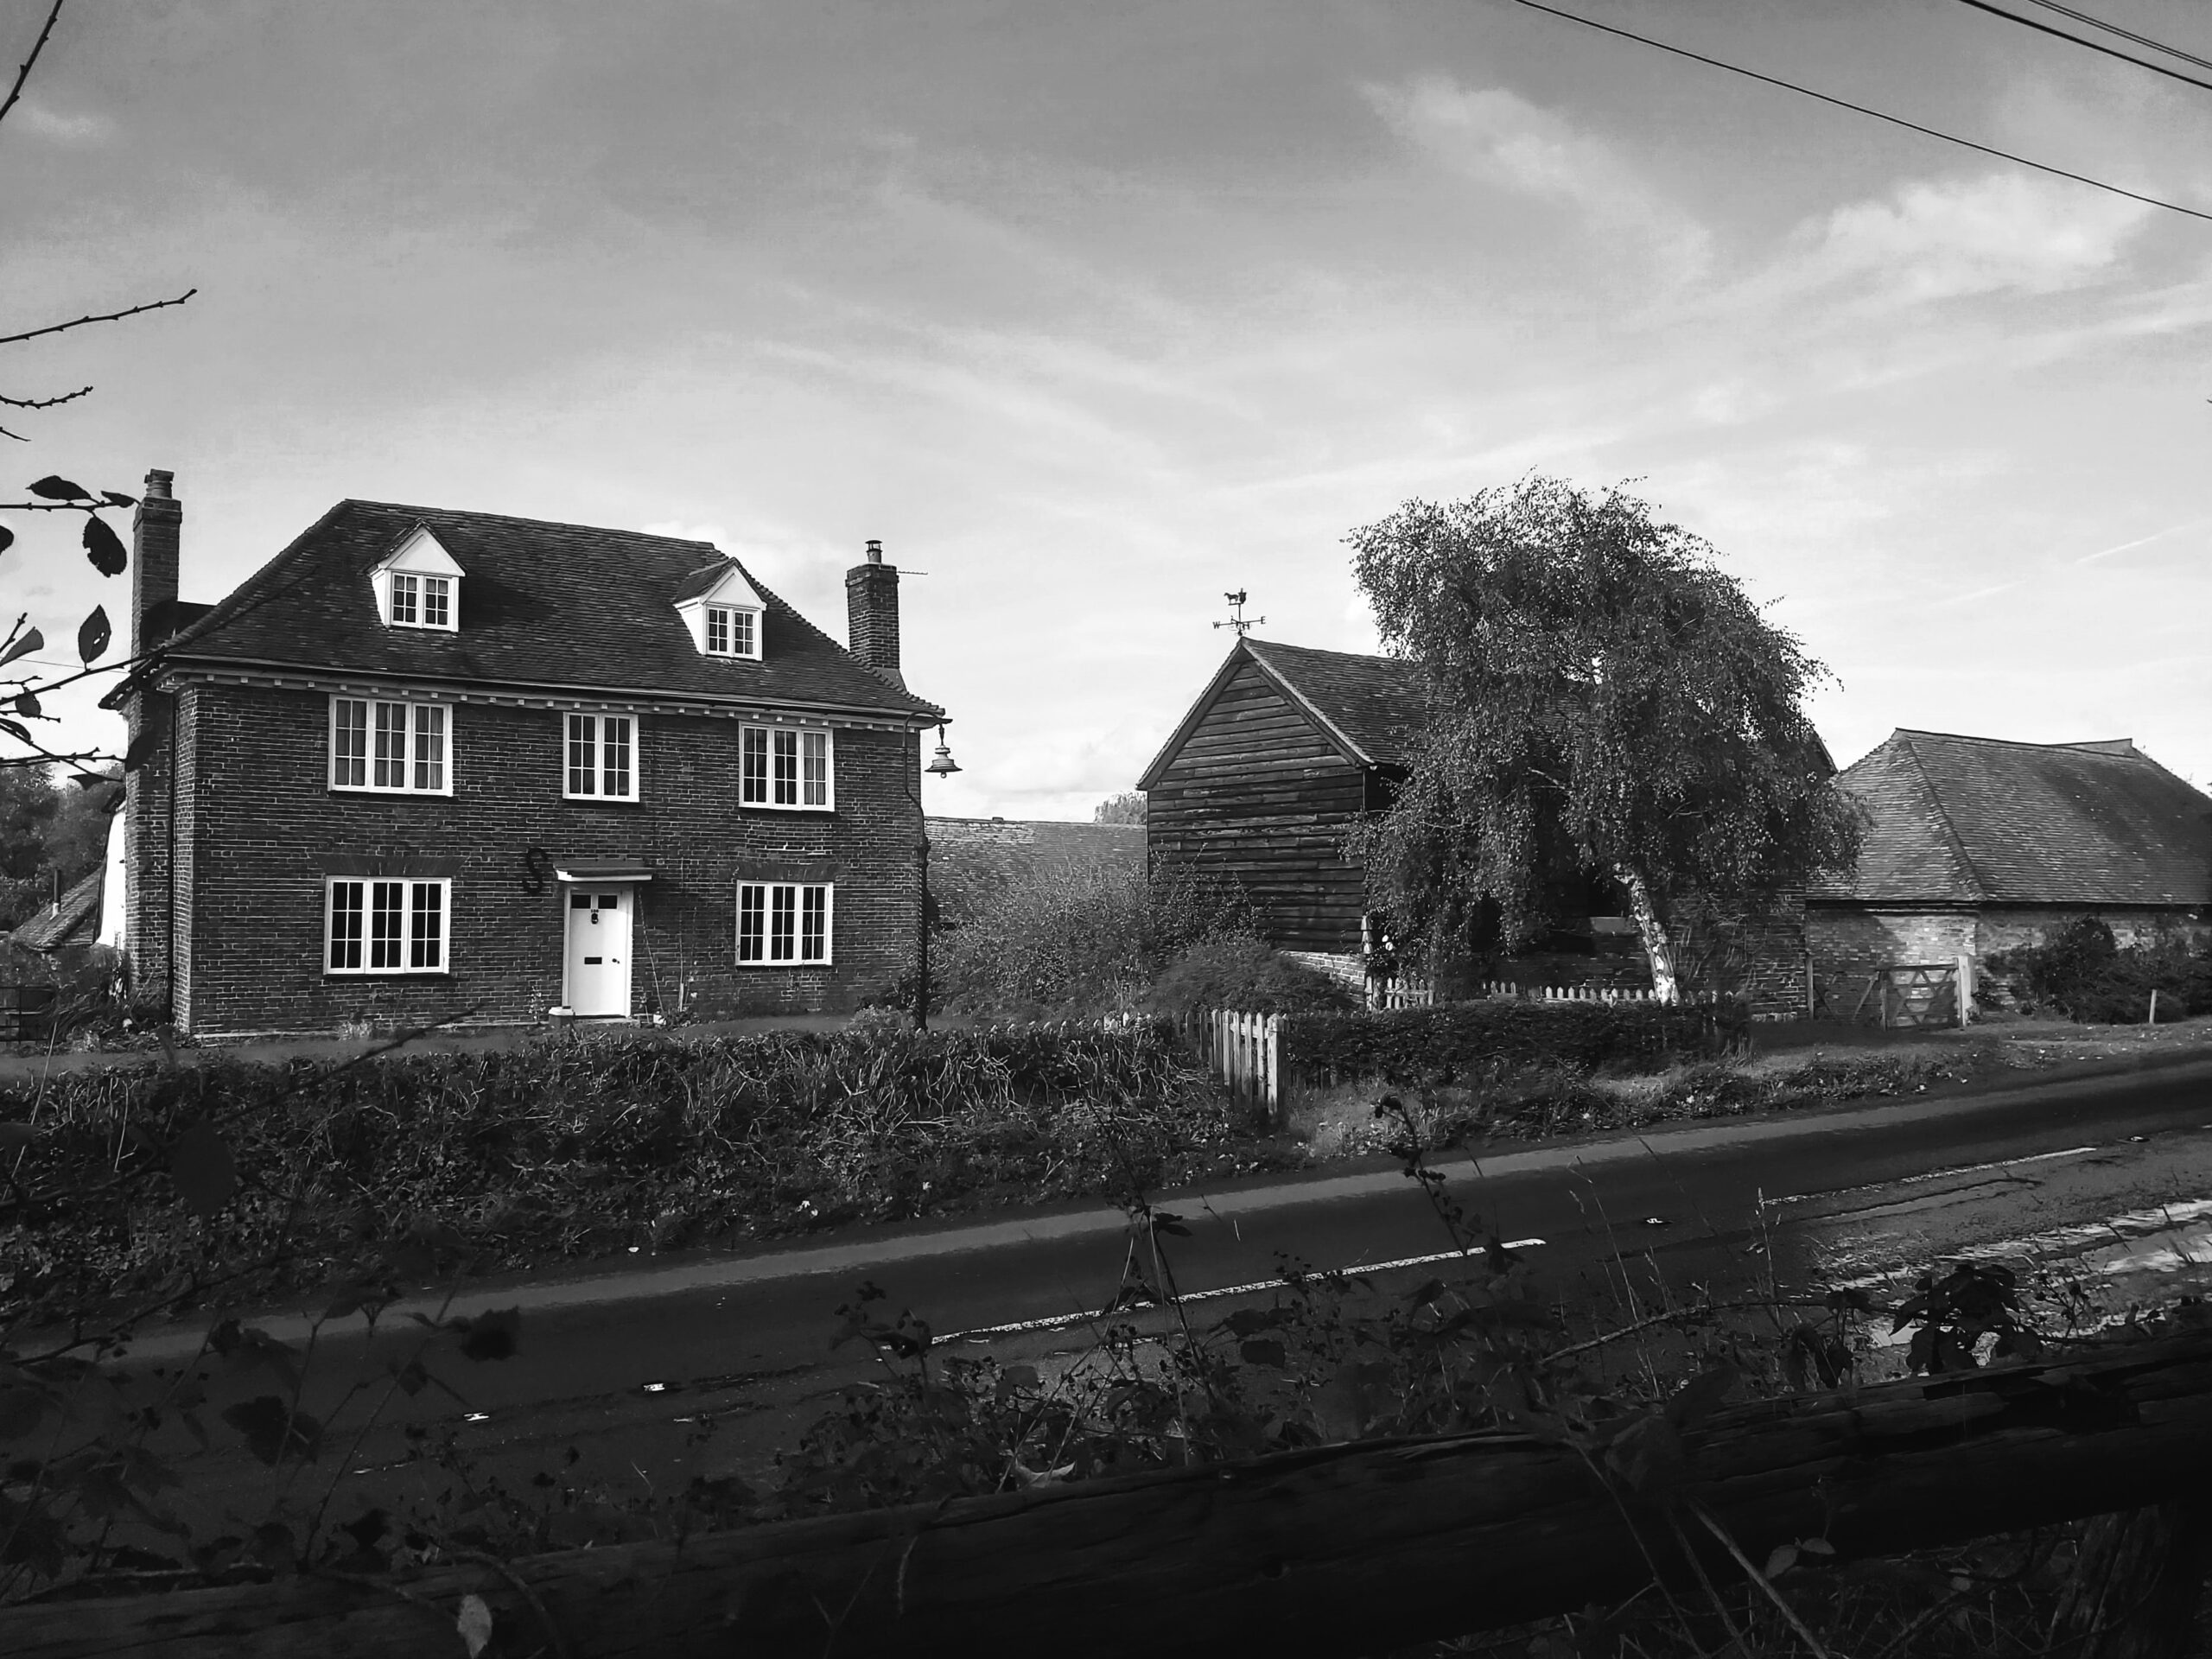 Black and white photo of houses in Aylesford, Kent, England.